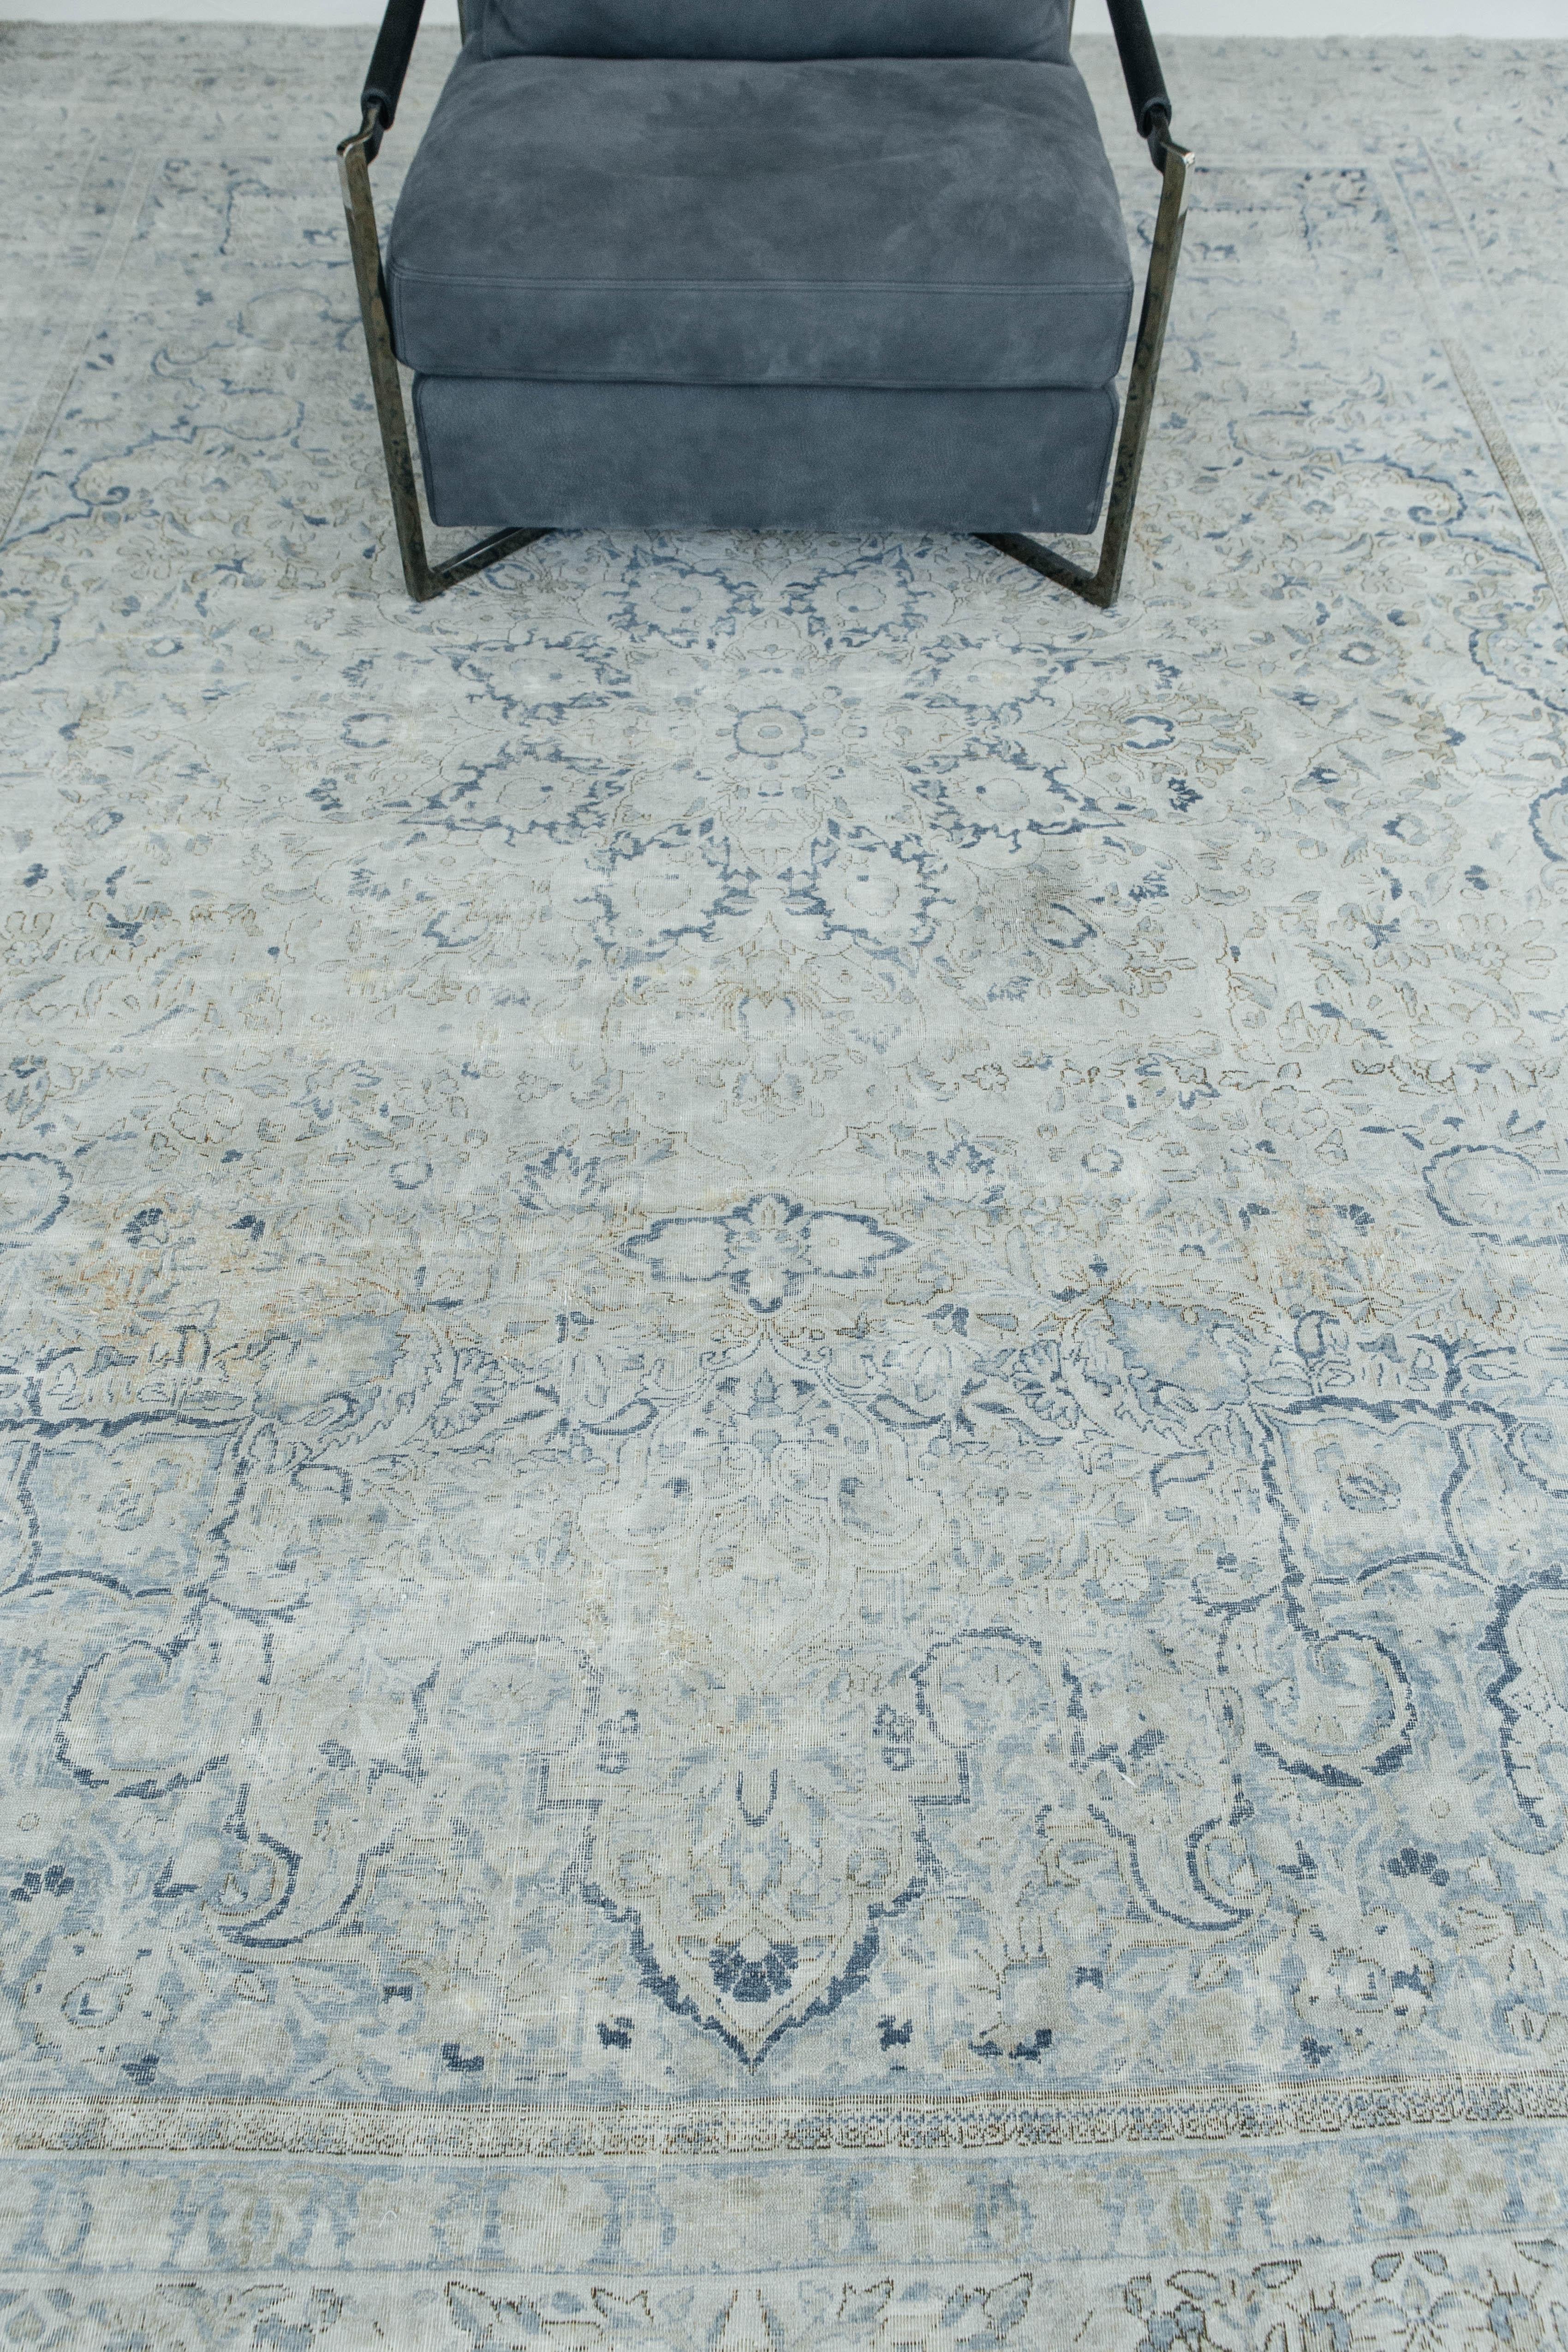 An antique Persian Kermanshah rug with neutral hues and beautiful blue accents. Kermanshah carpets are a unique and appealing style of antique Persian rugs, characterized by their distinct tribal aesthetic. This piece's geometric structure as well